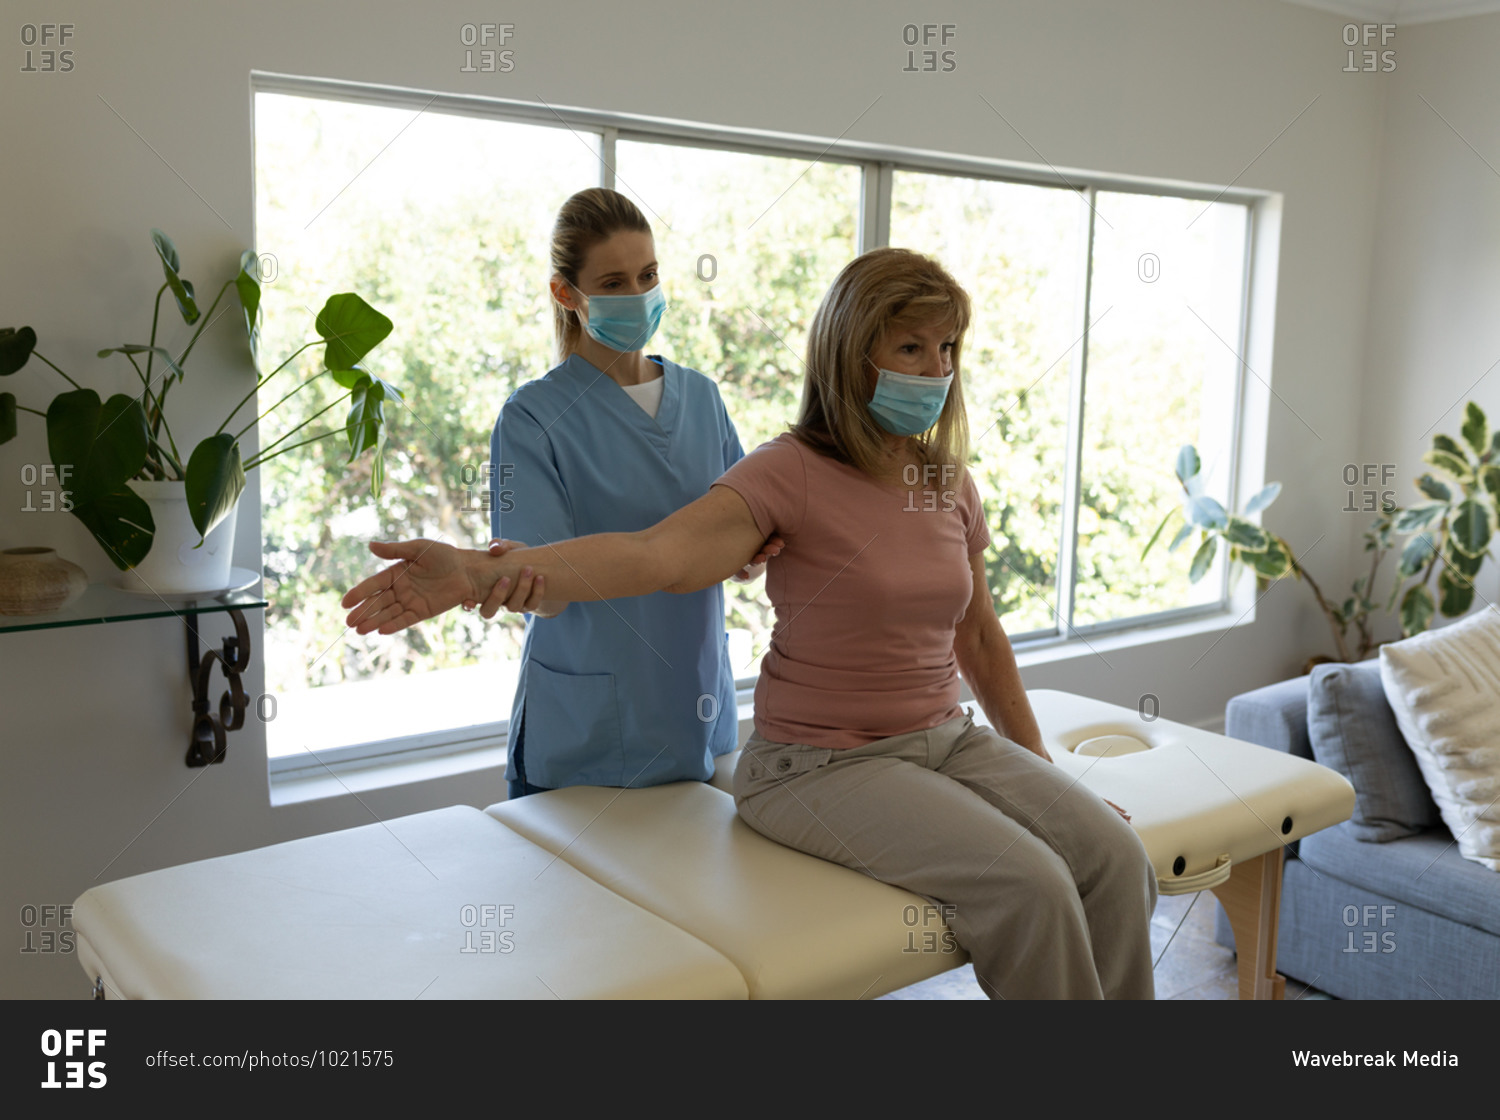 Senior Caucasian woman at home visited by Caucasian female nurse, stretching her arm, wearing face masks. Medical care at home during Covid 19 Coronavirus quarantine.